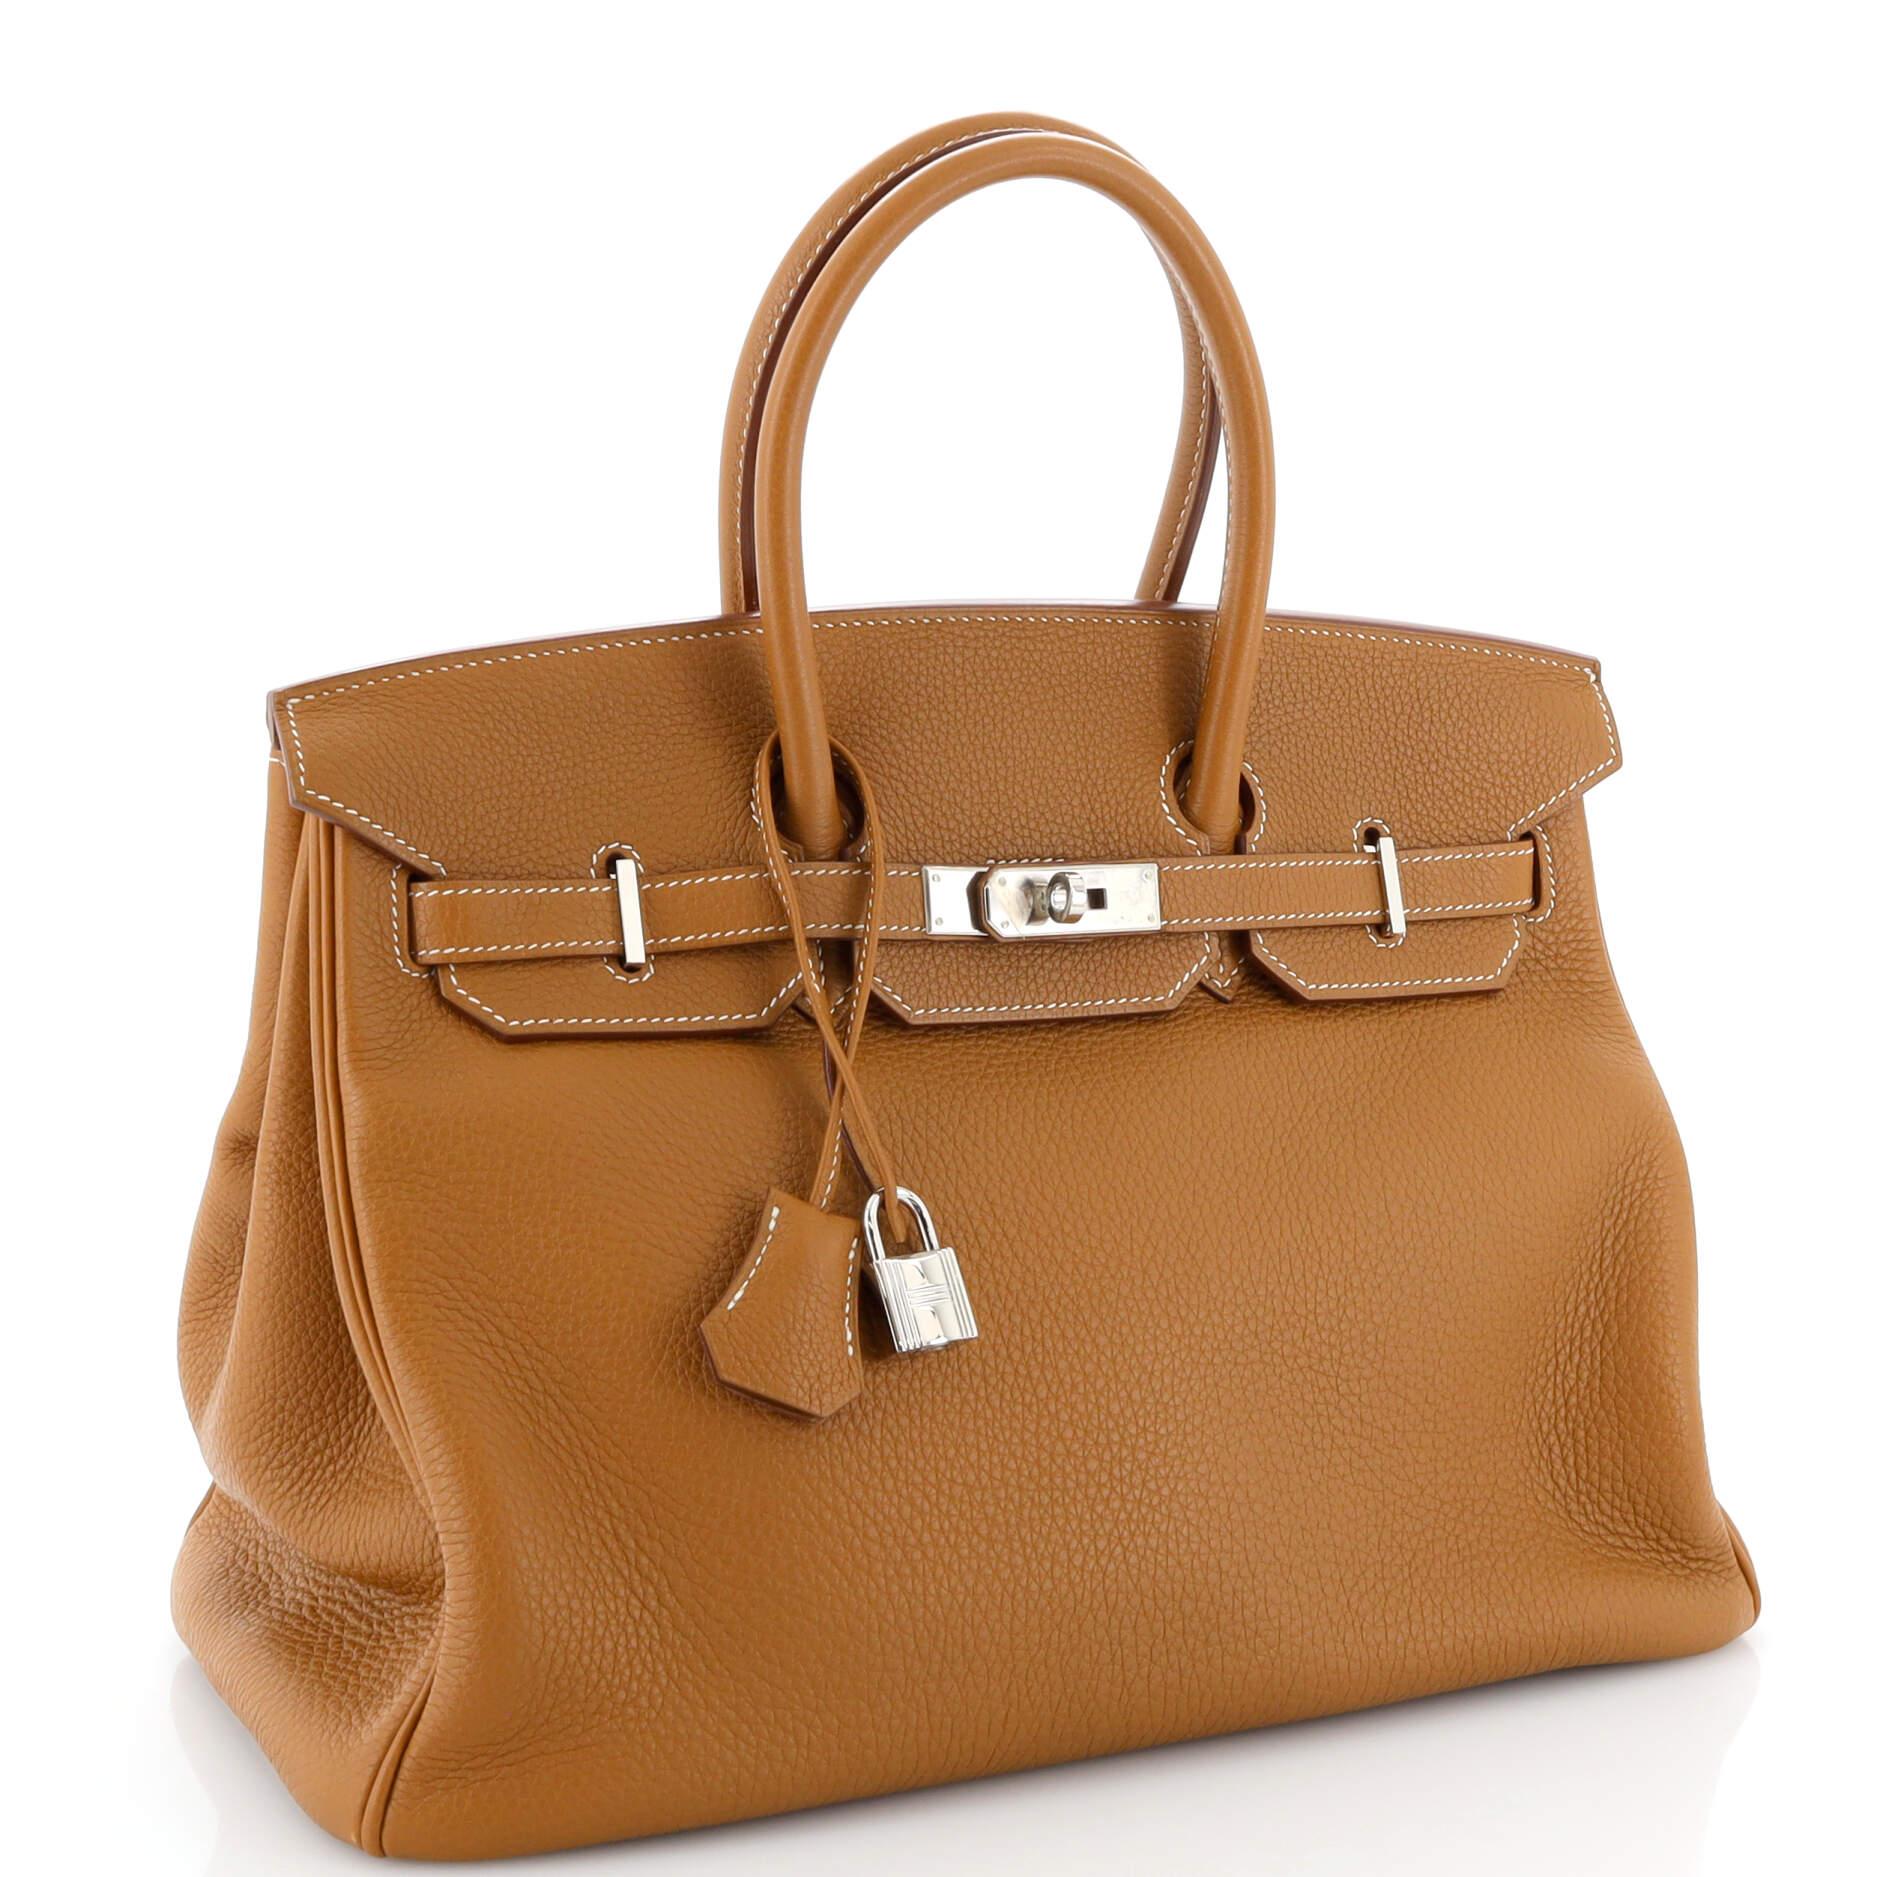 Hermes Birkin Handbag Gold Clemence with Palladium Hardware 35 In Good Condition For Sale In NY, NY